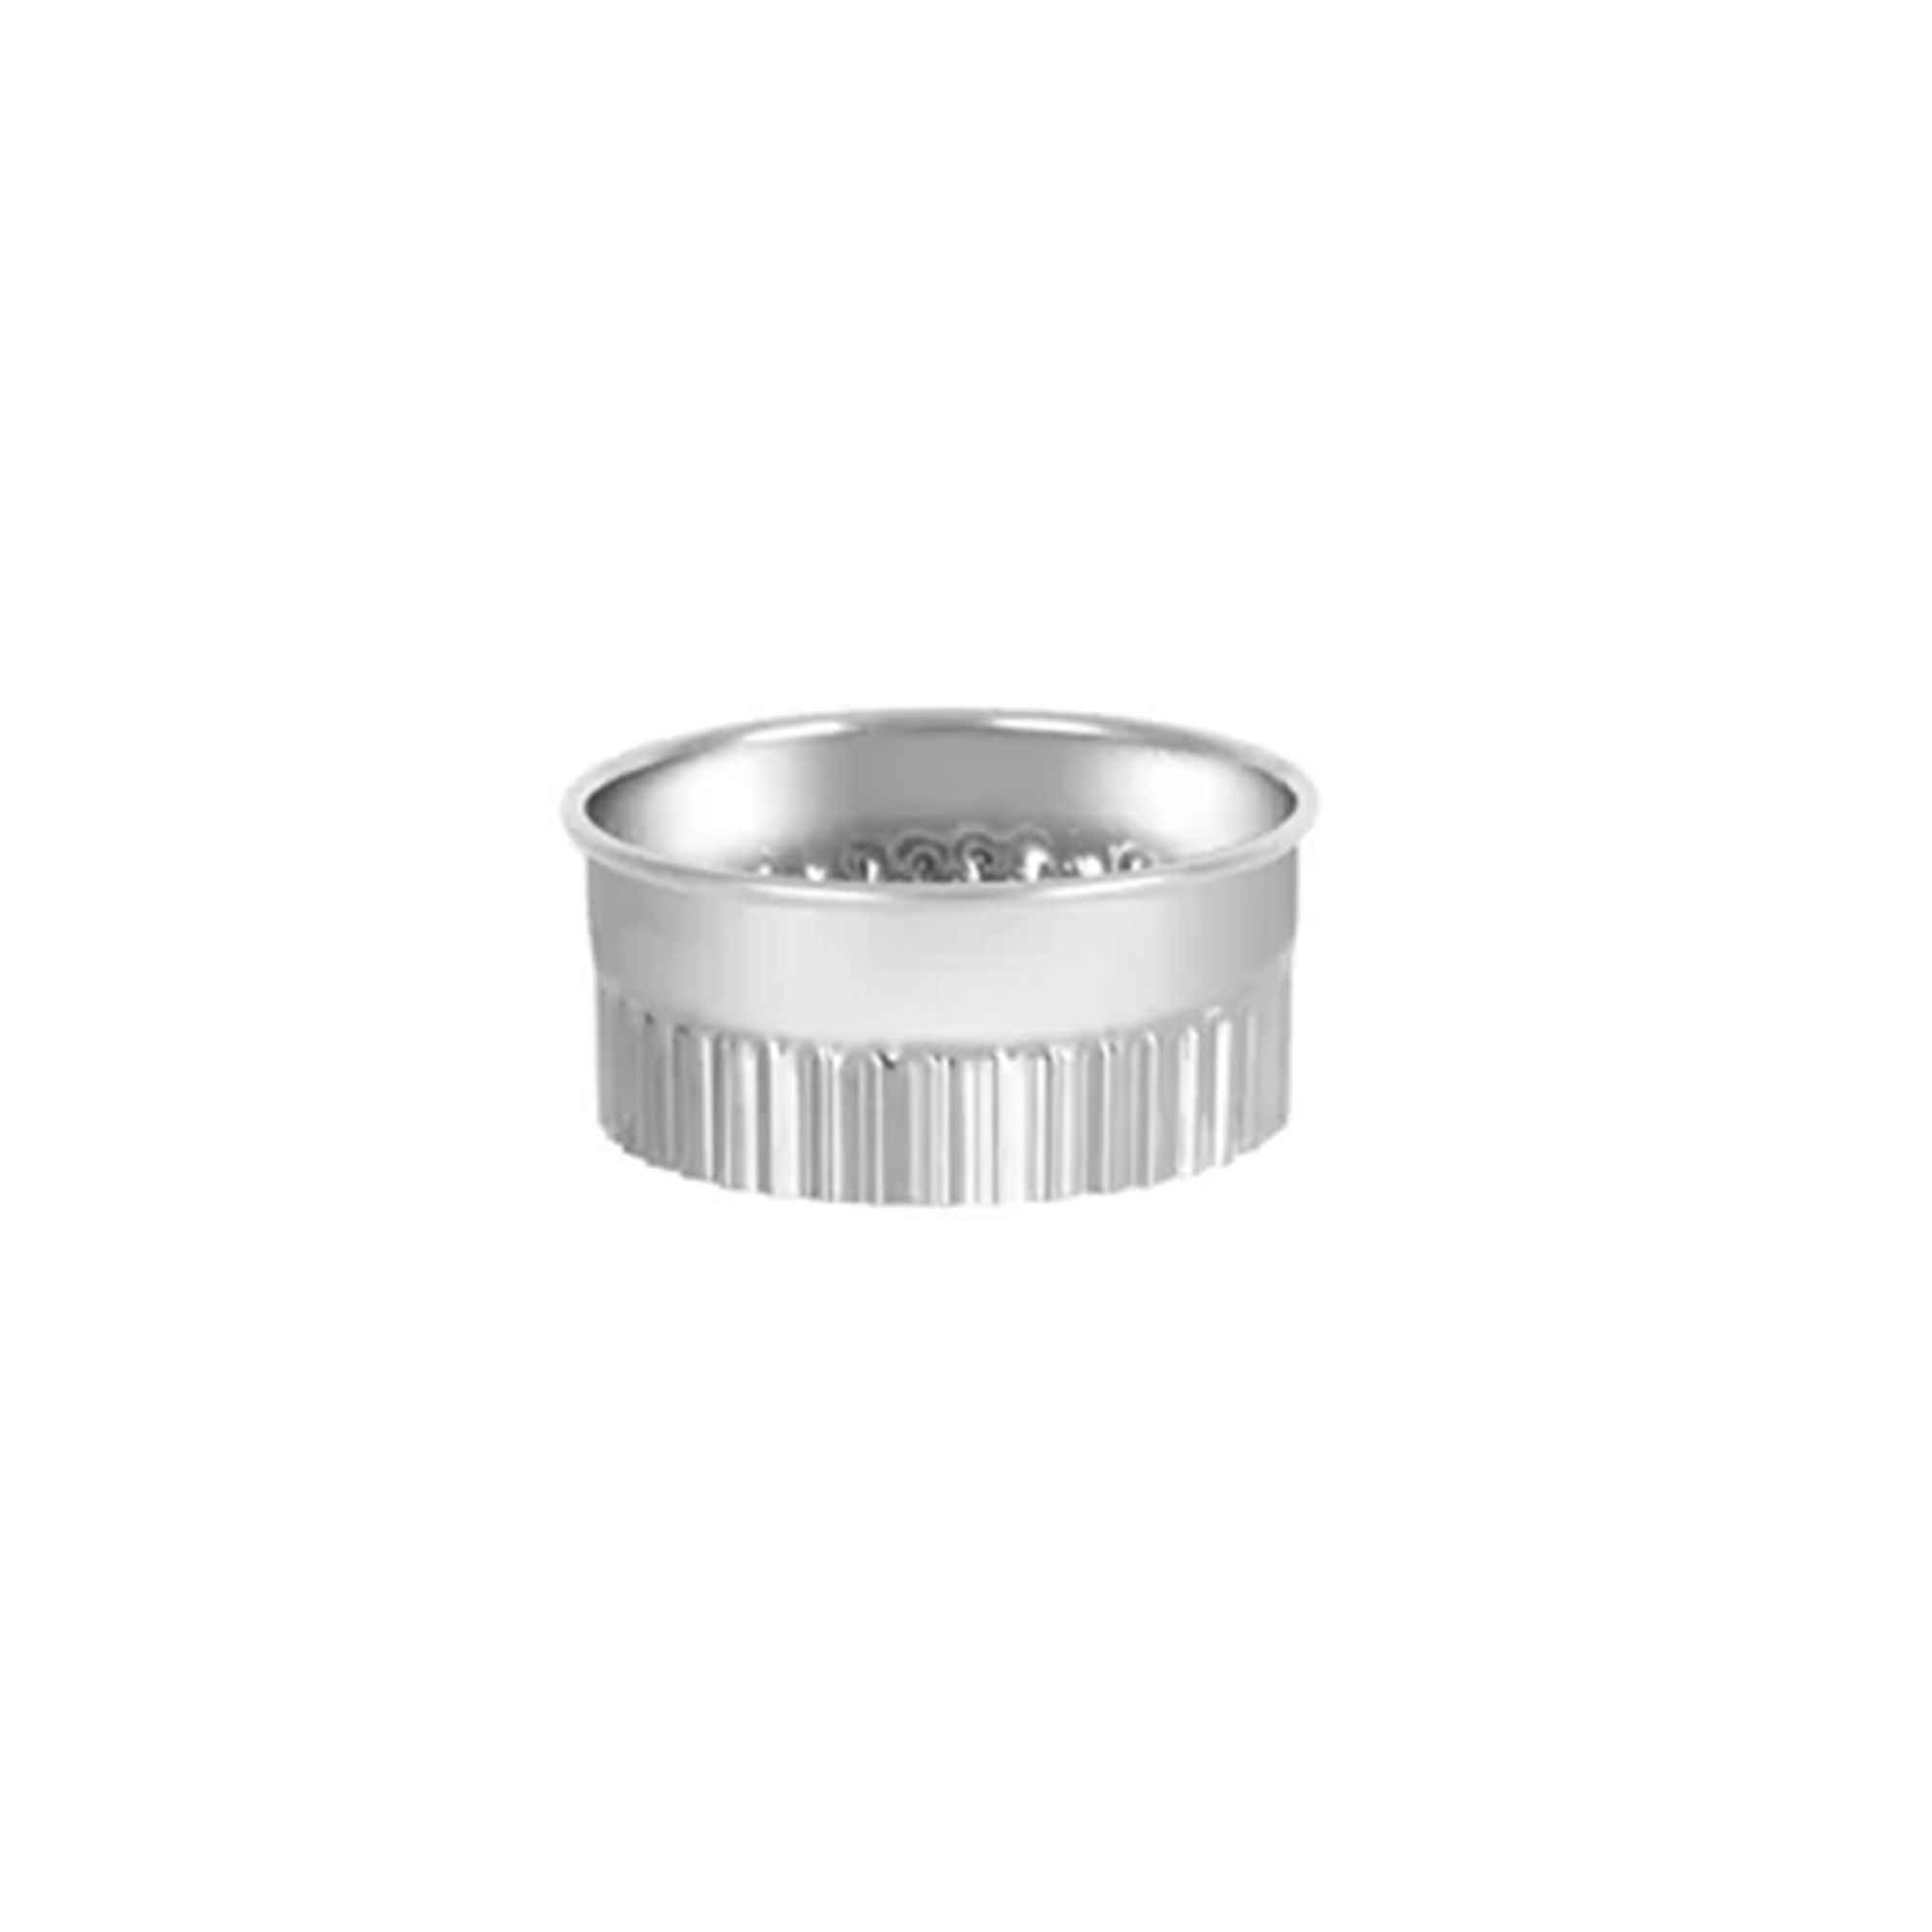 Chef Inox Cutter Crinkled 63mm Image 1